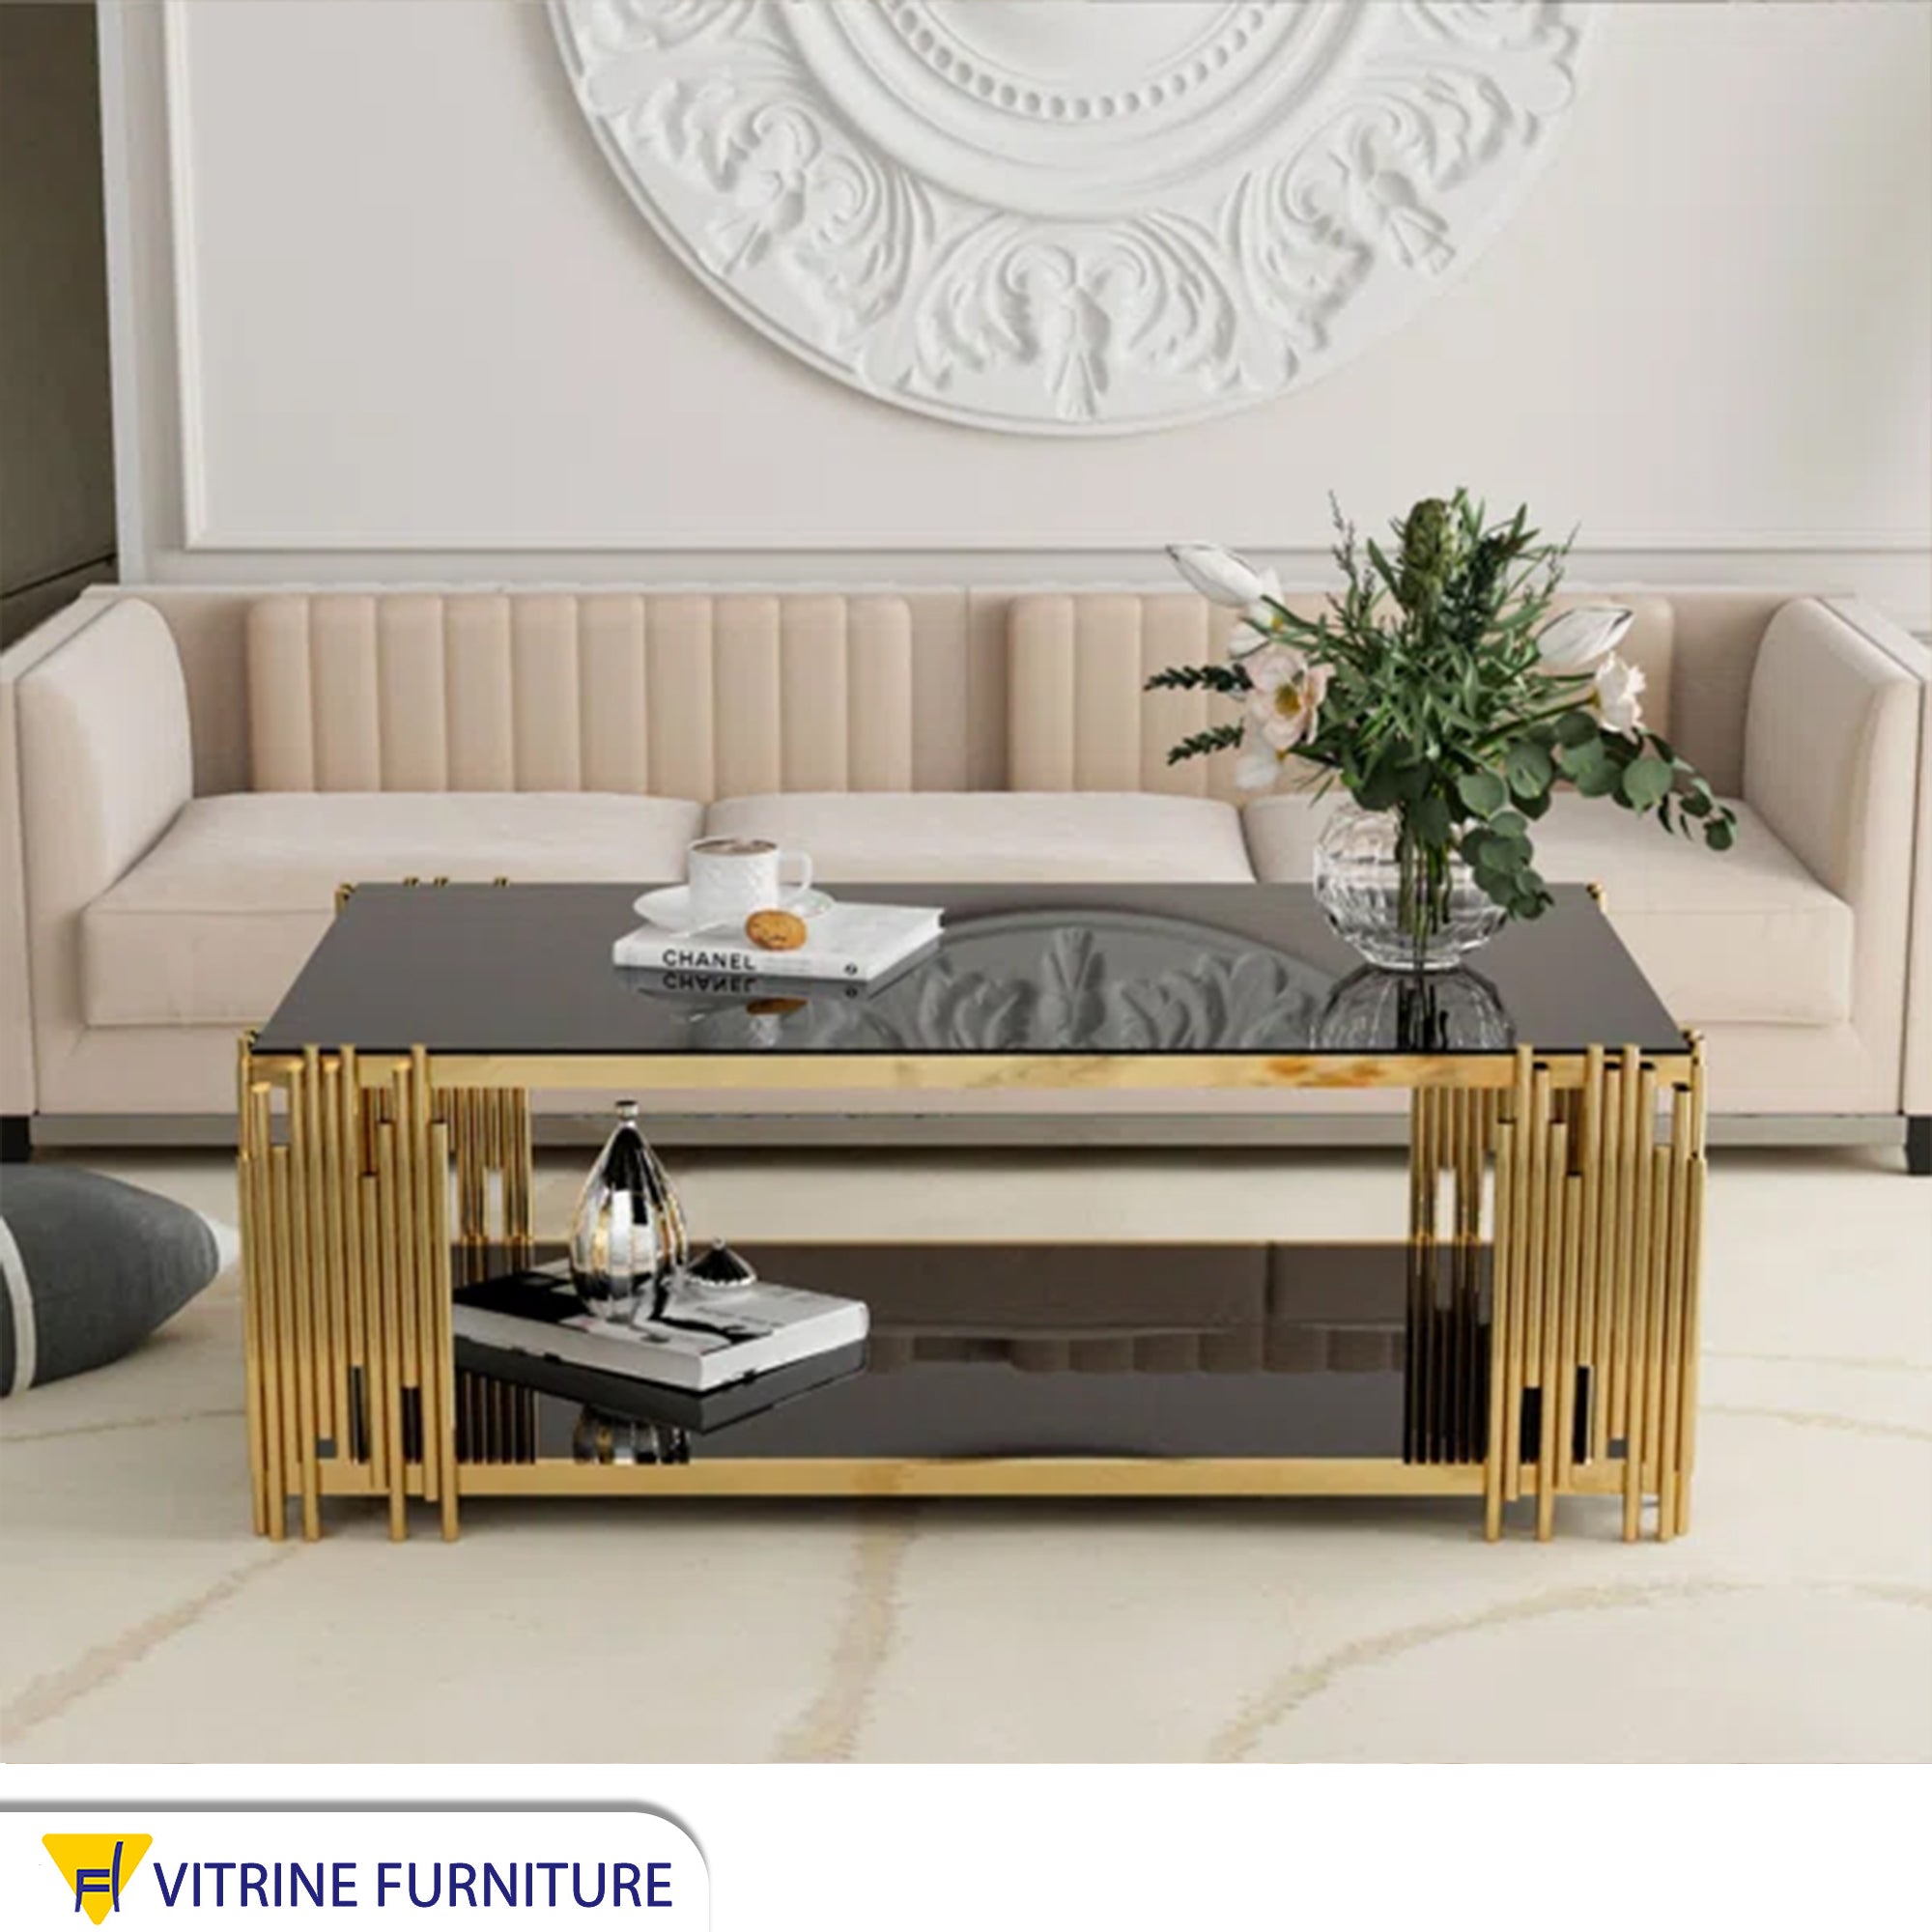 A rectangular table in gold with a top and bottom